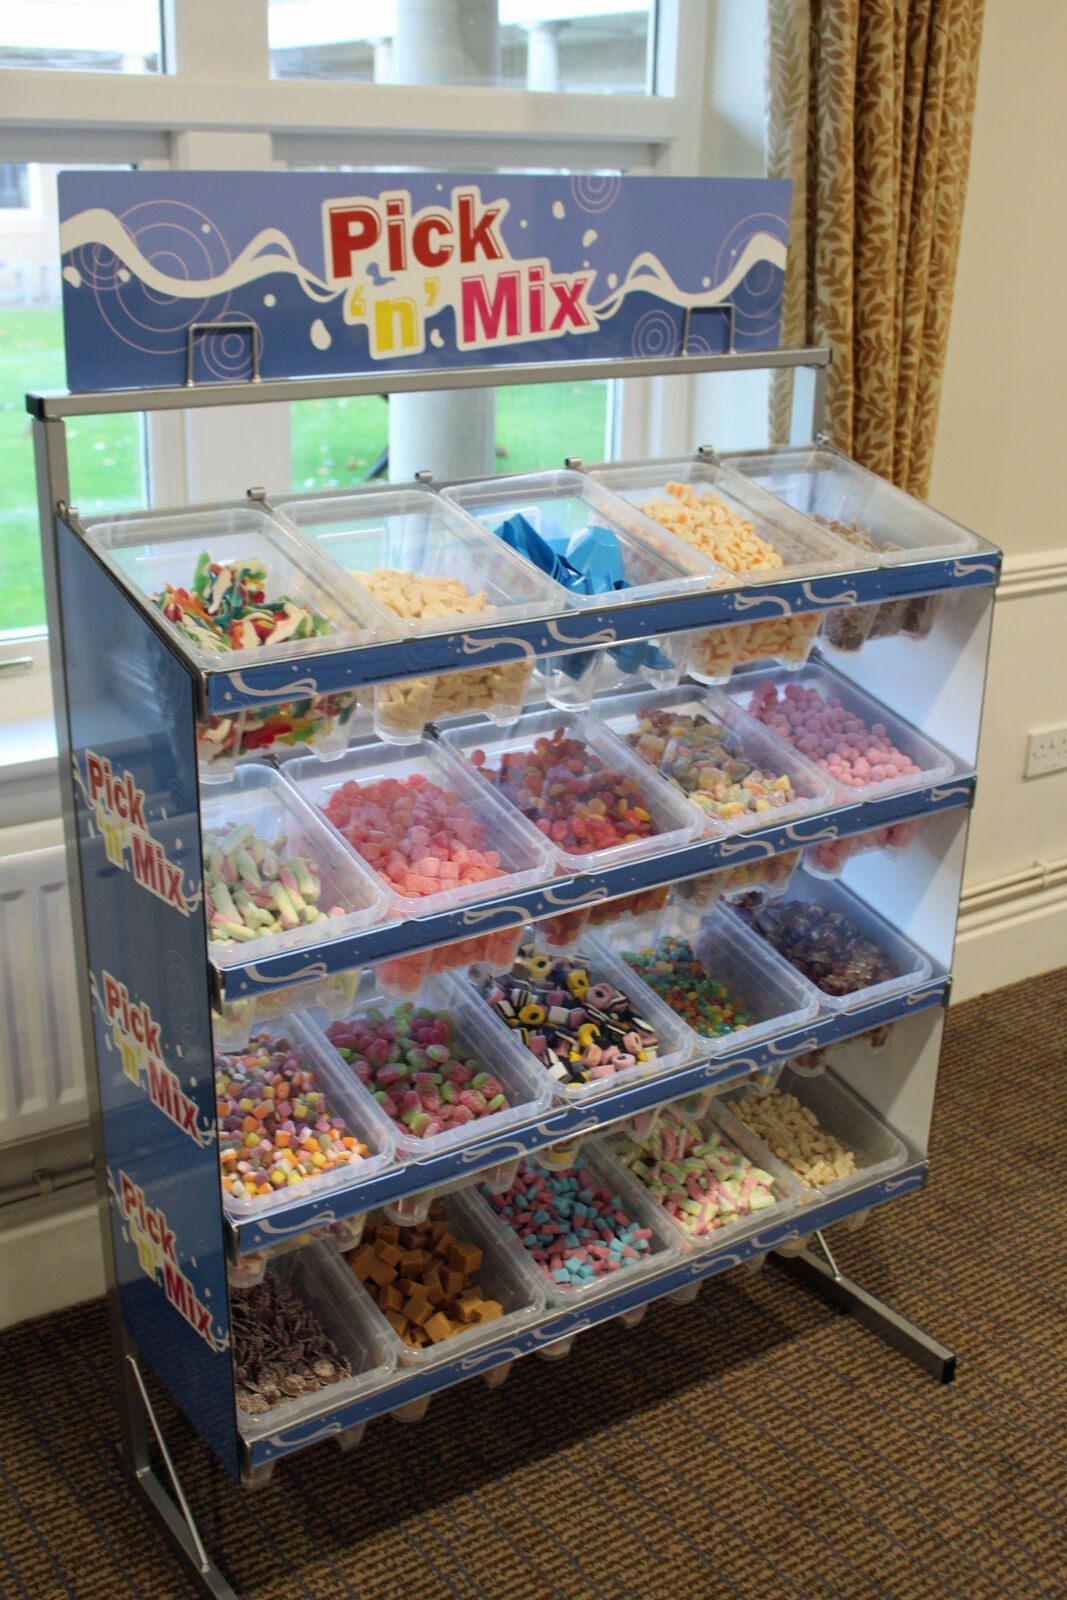 Pick 'n' Mix - Cromore Events